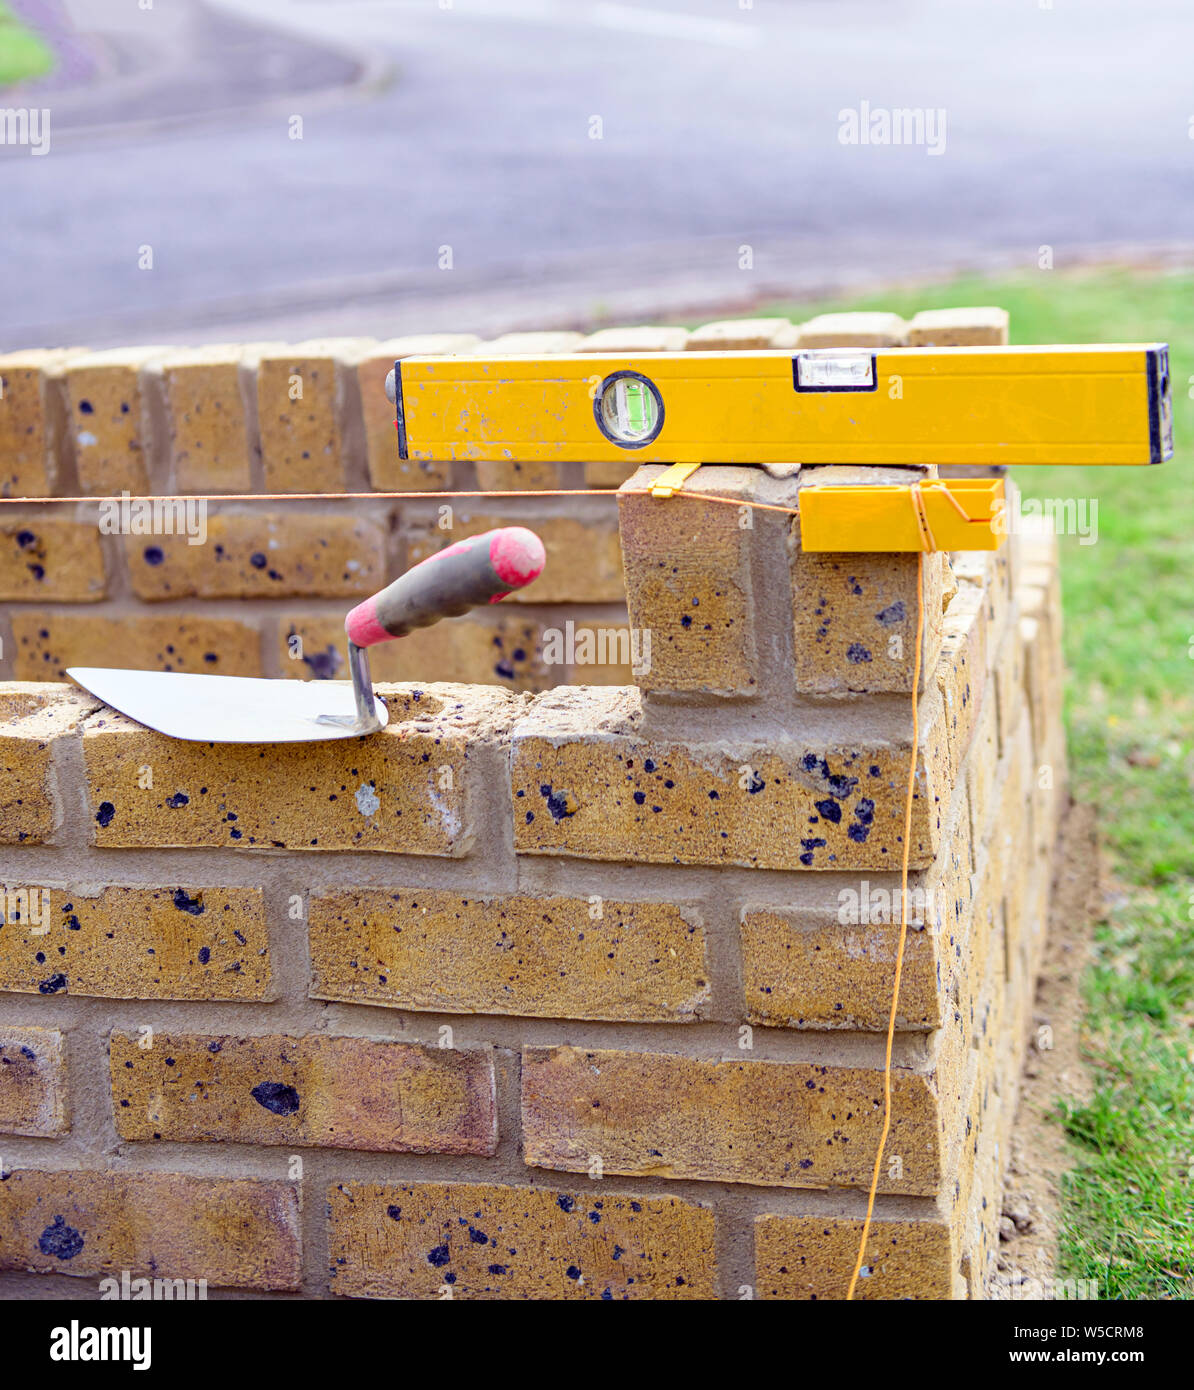 bricklayers trowel, spirit level, block line and tingle on a partially built brick plant container. Stock Photo